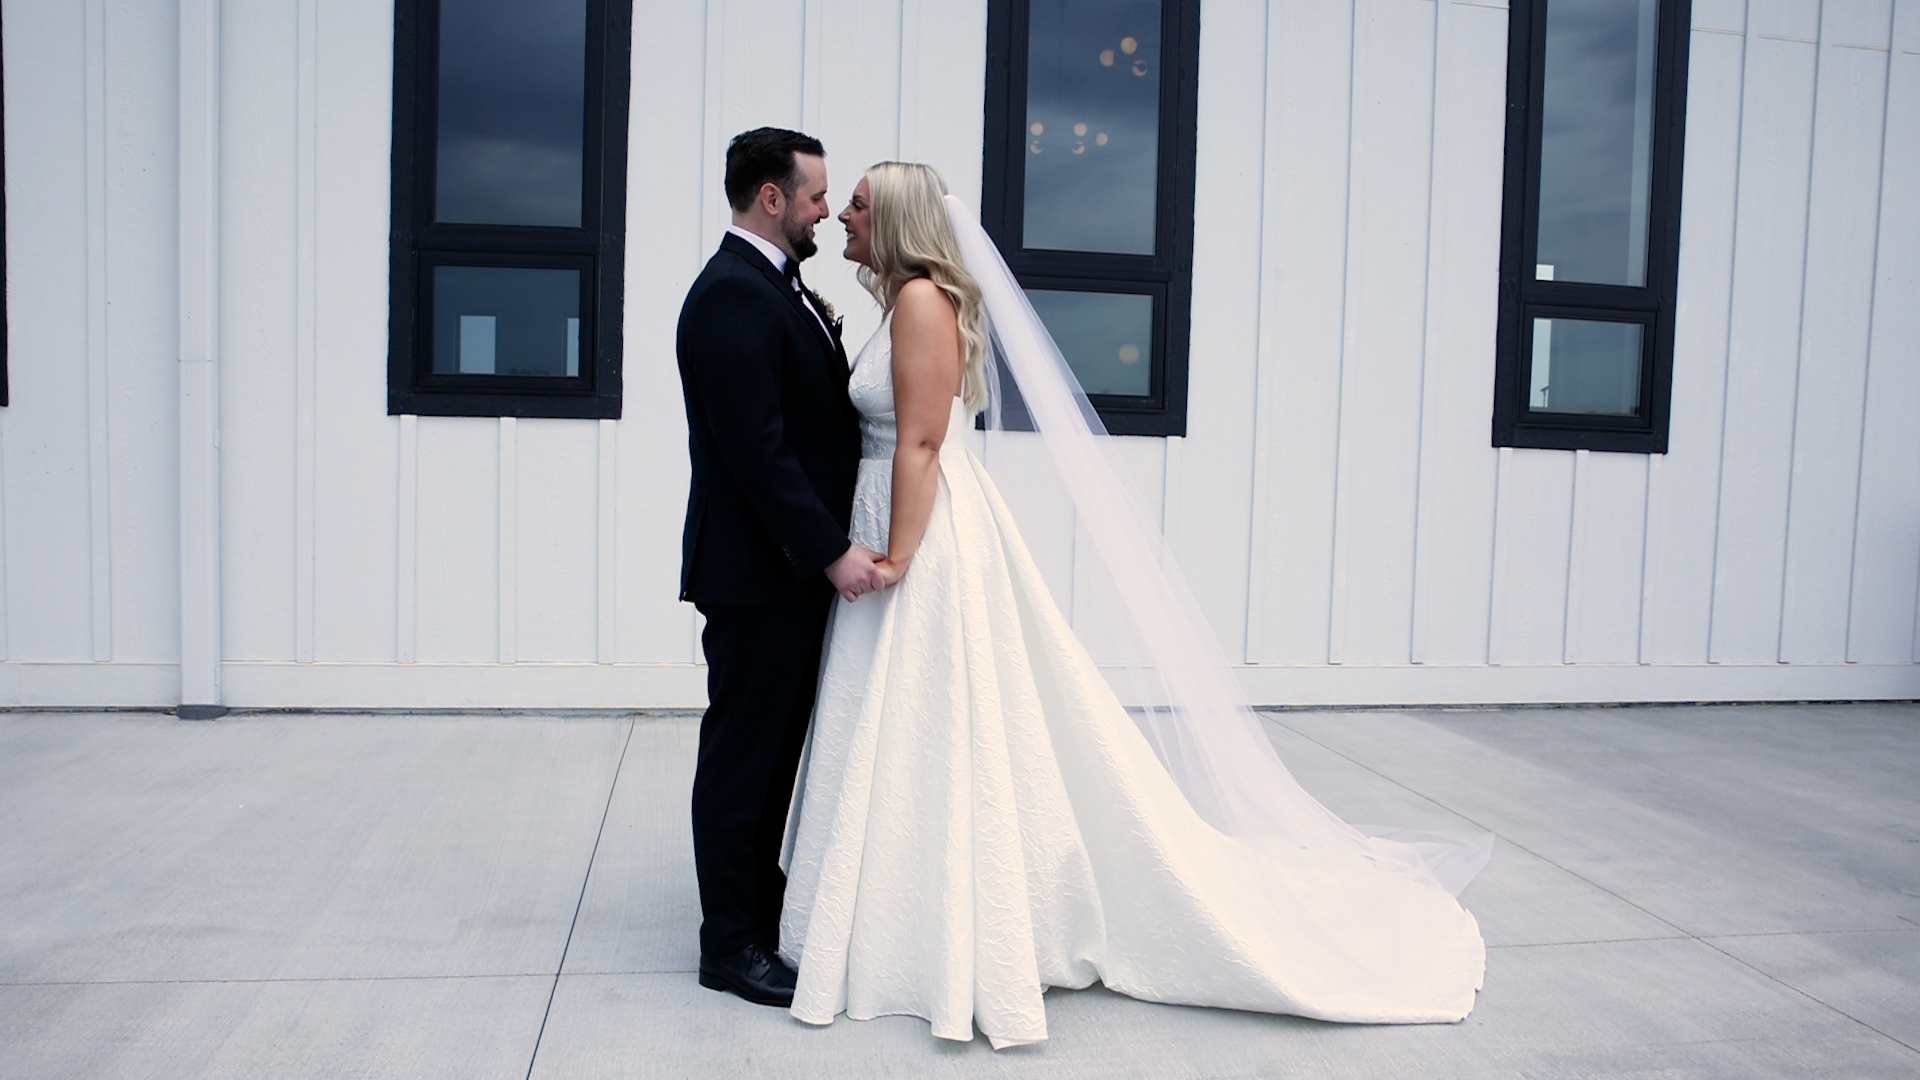 Newlyweds stand belly button to belly button in front of a white wall with black framed windows Woodhaven weddings